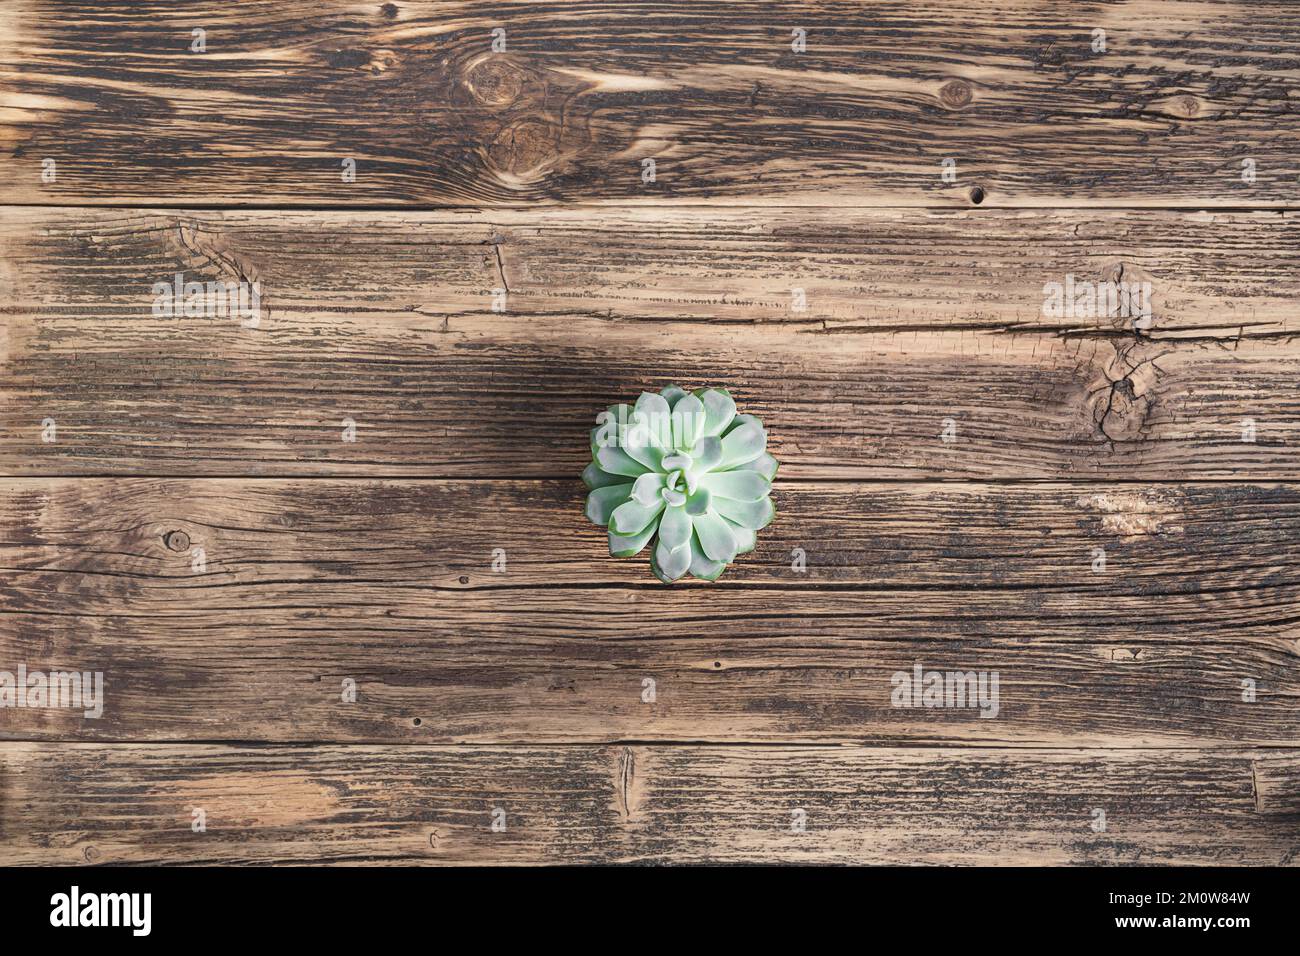 Echeveria succulent plant on the old wooden table, top view with copy space Stock Photo